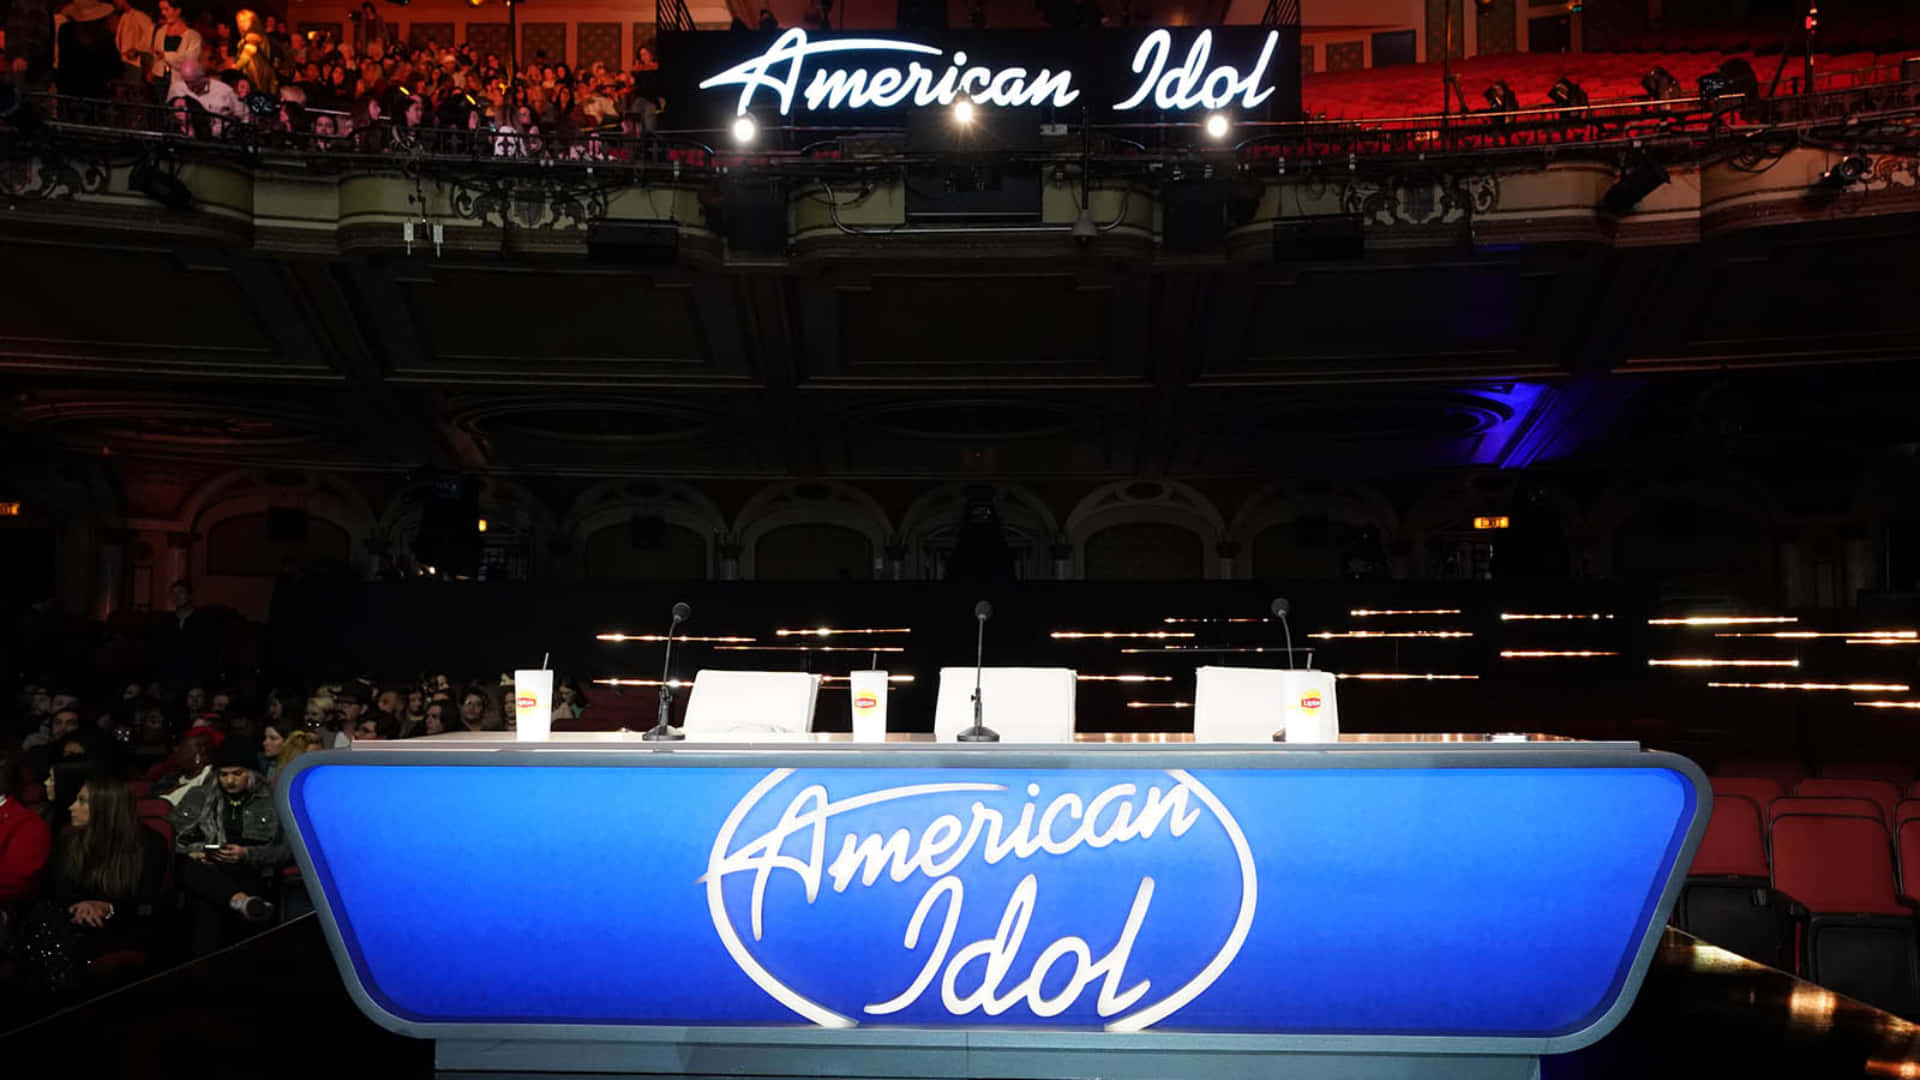 American Idol - A Stage With A Blue Sign